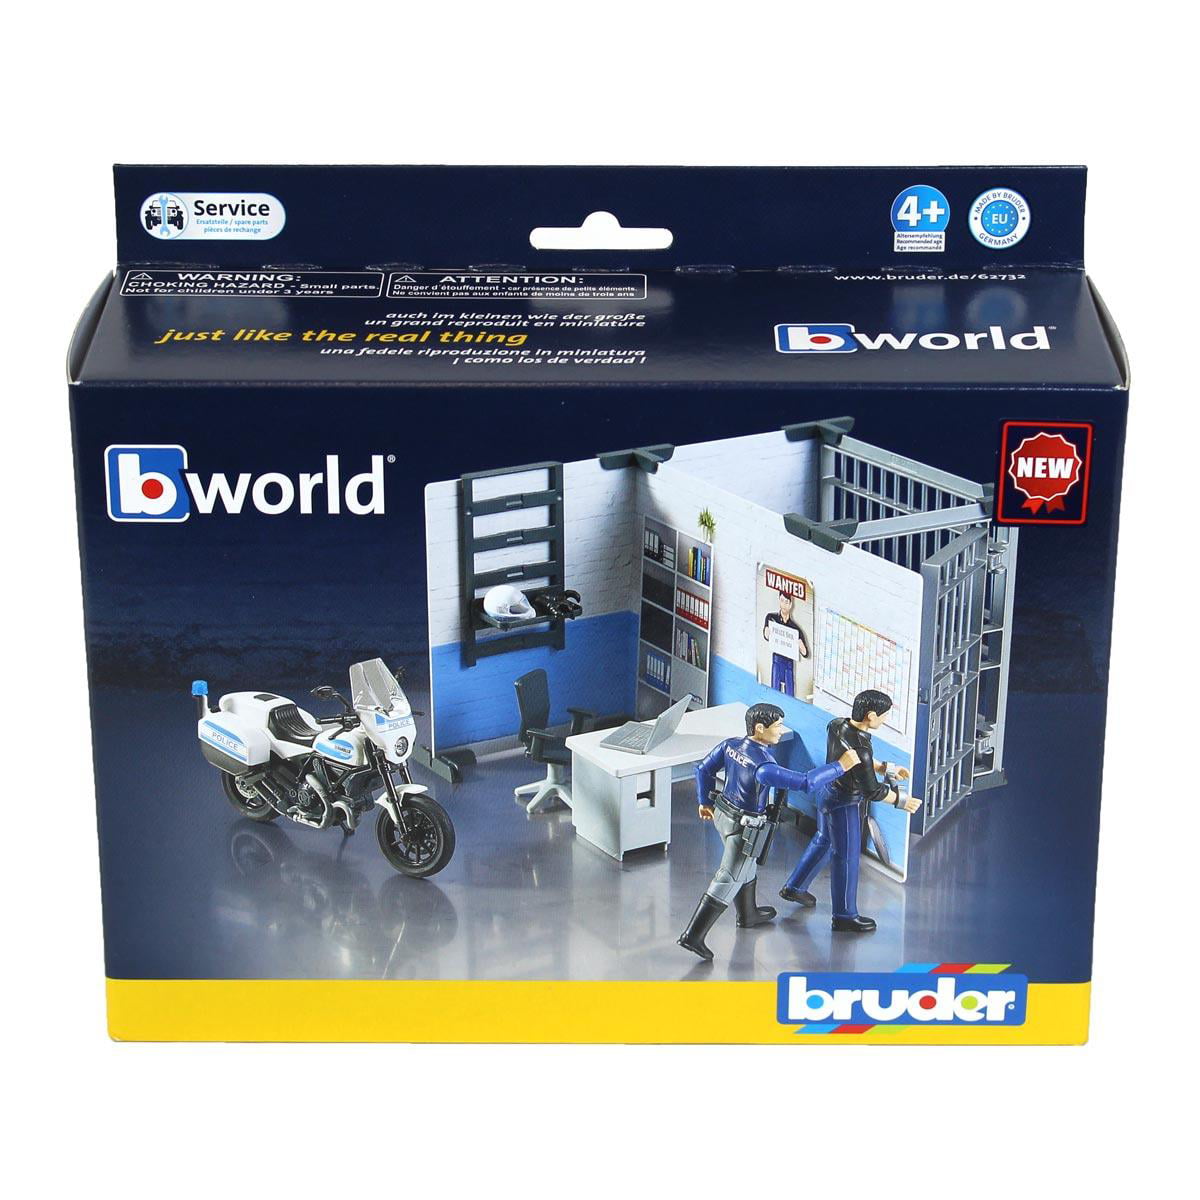 BRUDER Bworld 60430 Policewoman Light Skin With Accessories Save 6 GMC for sale online 